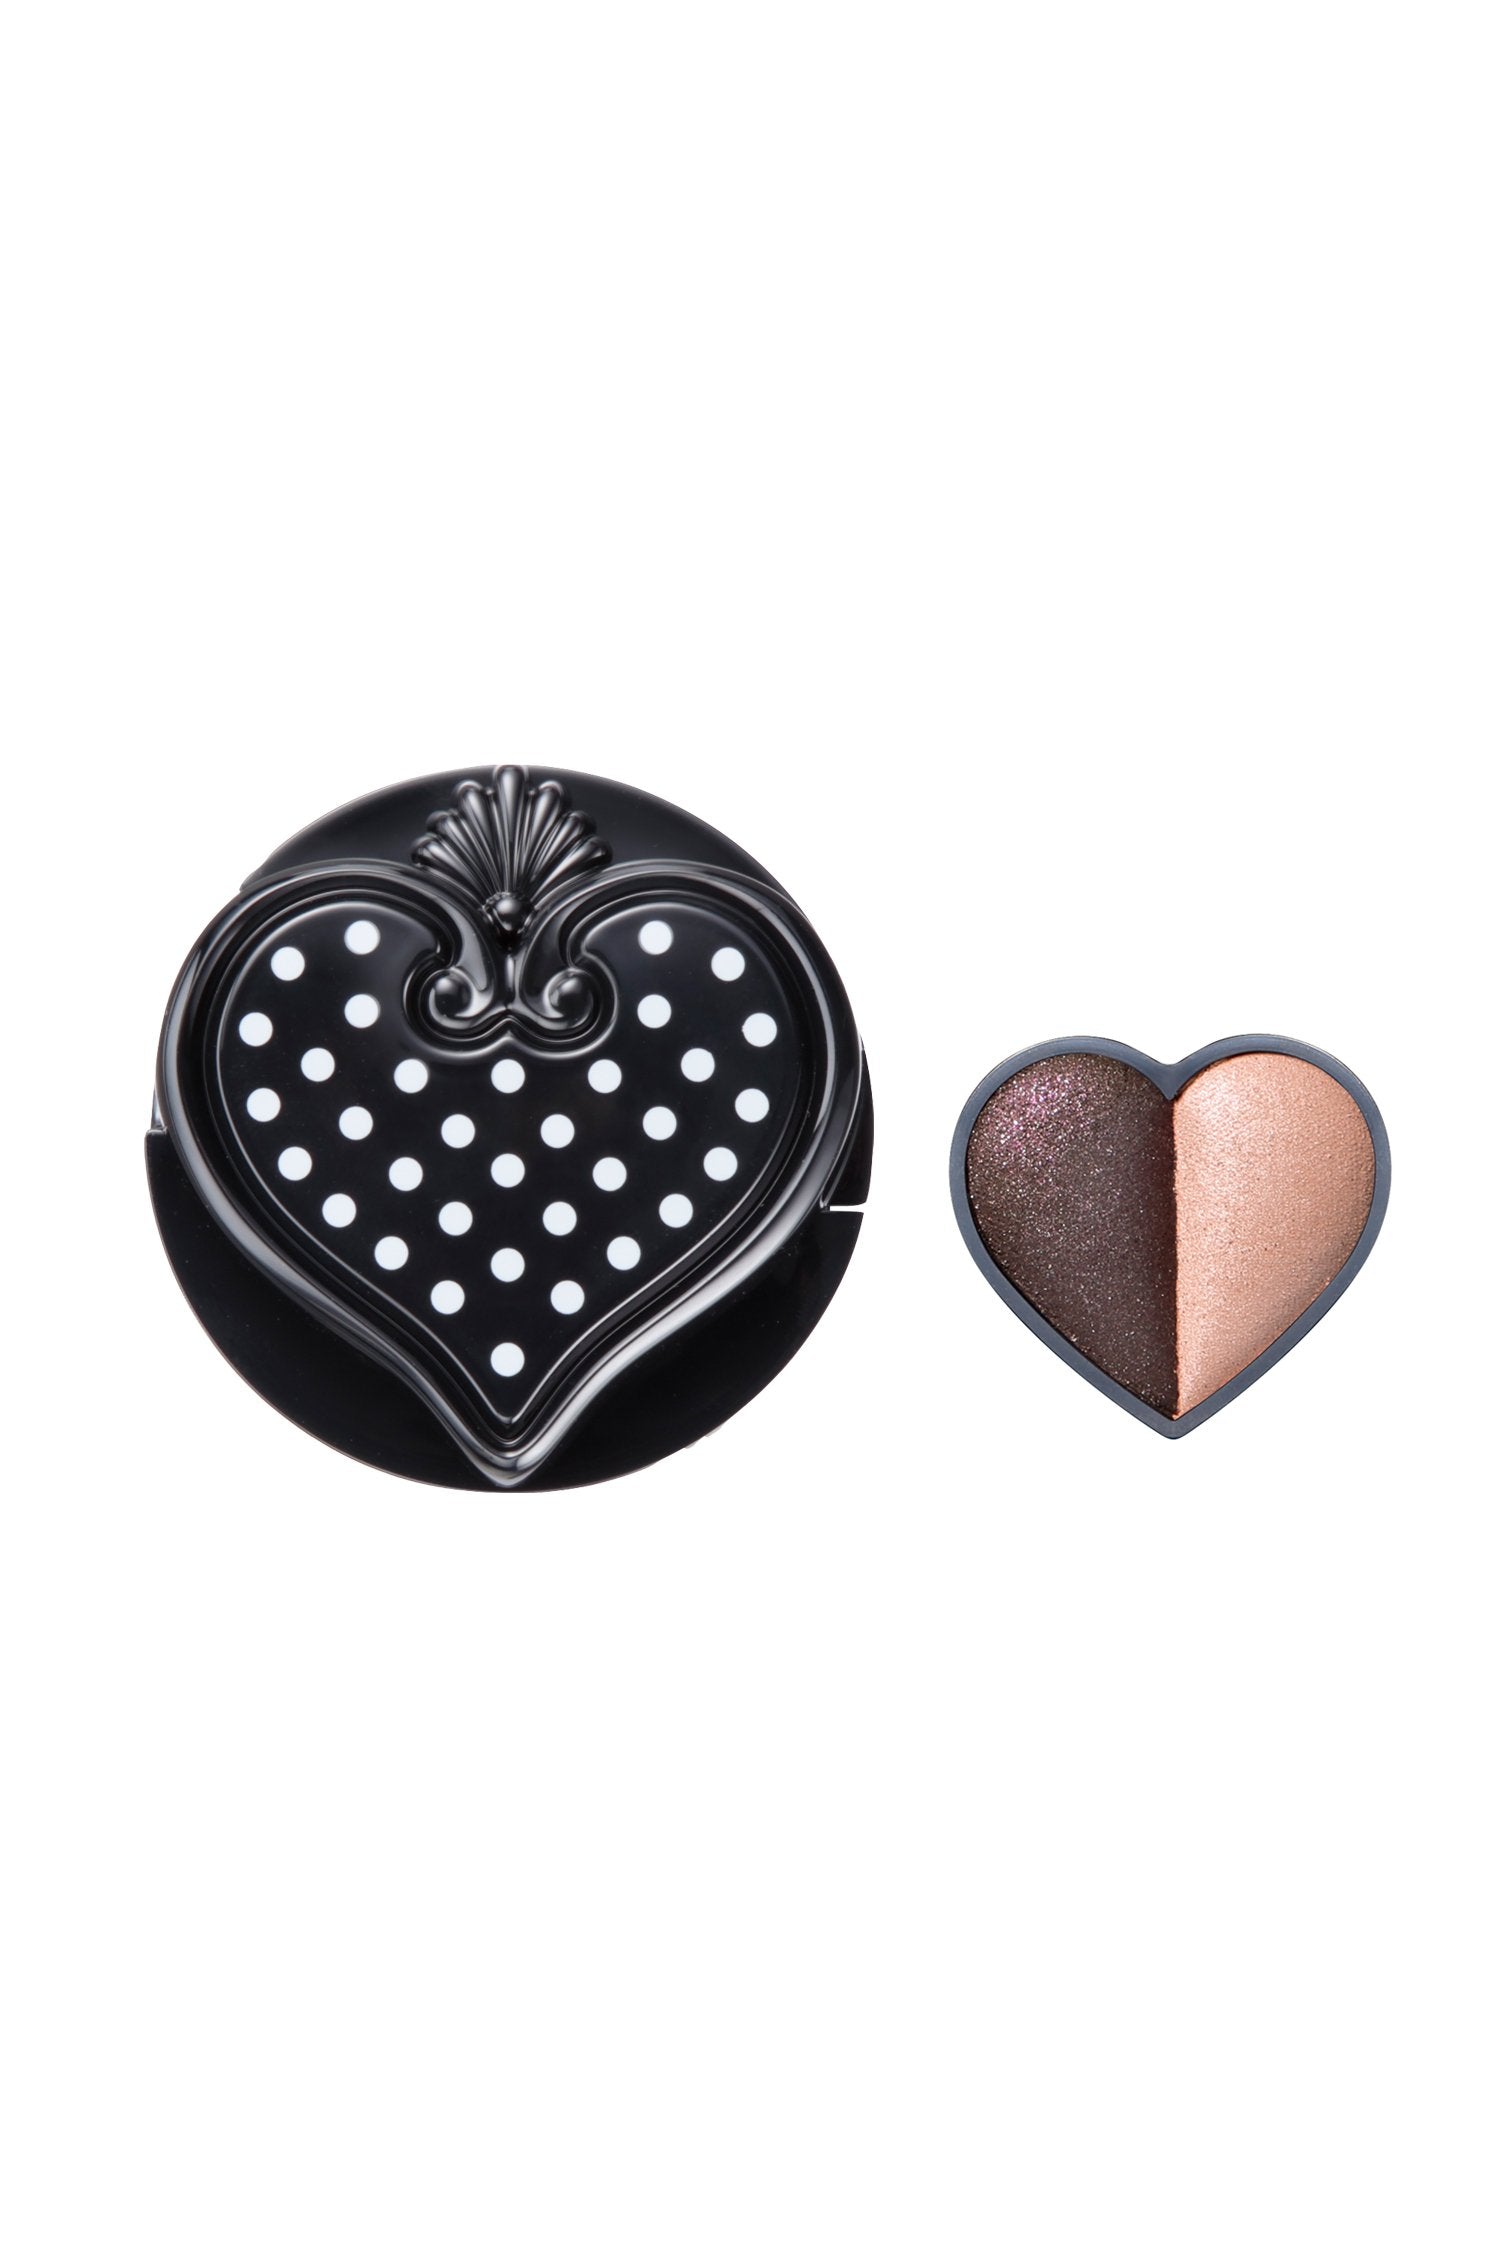 Sui black eye color 300 FUNKY PINK DUO round black container with a heart shaped lid with white dots, and a seashell